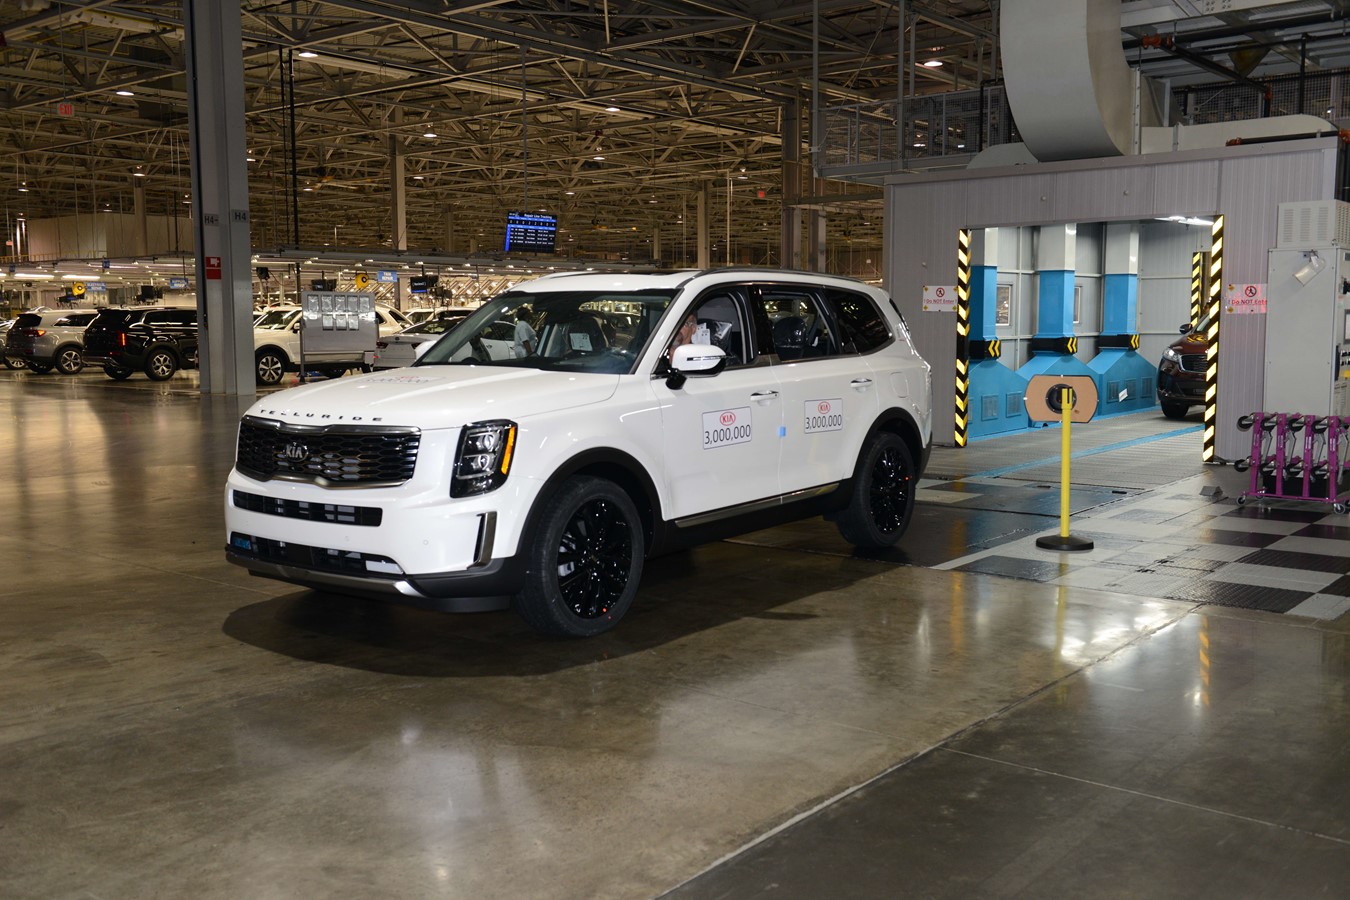 KMMG’s three millionth vehicle rolls off the assembly line